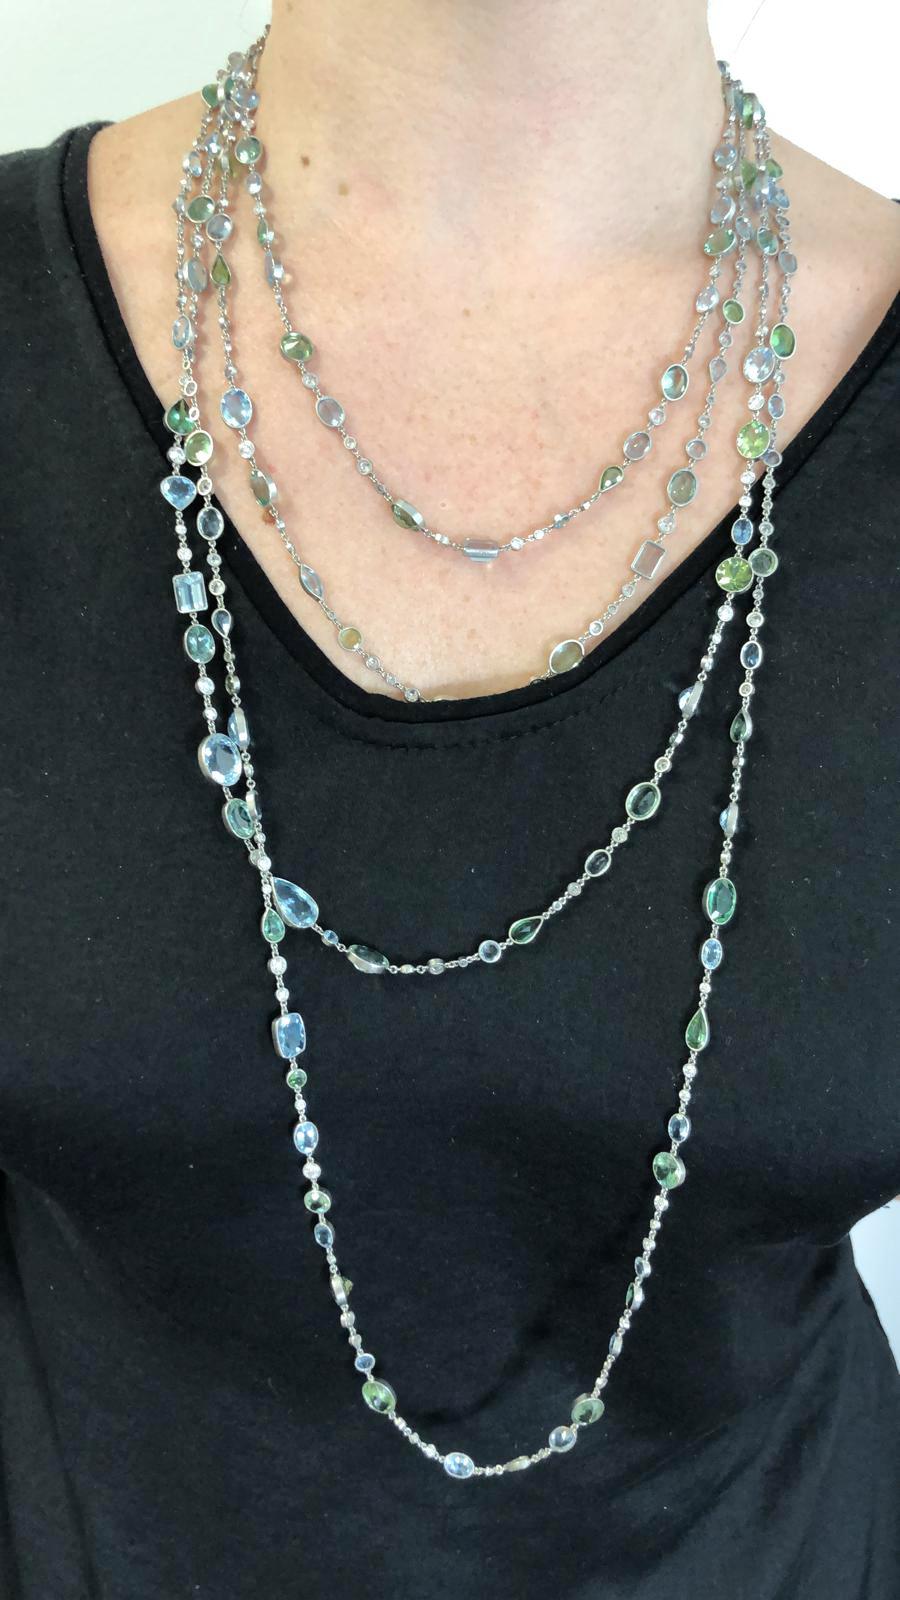 Aquamarine Tourmaline Diamond Necklace in Platinum, 20 inch necklace

Faceted aquamarines, tourmalines in tones of sea blue and green are accented with white diamonds throughout. Gemstones are cut into oval, pear and round shapes, all mounted in